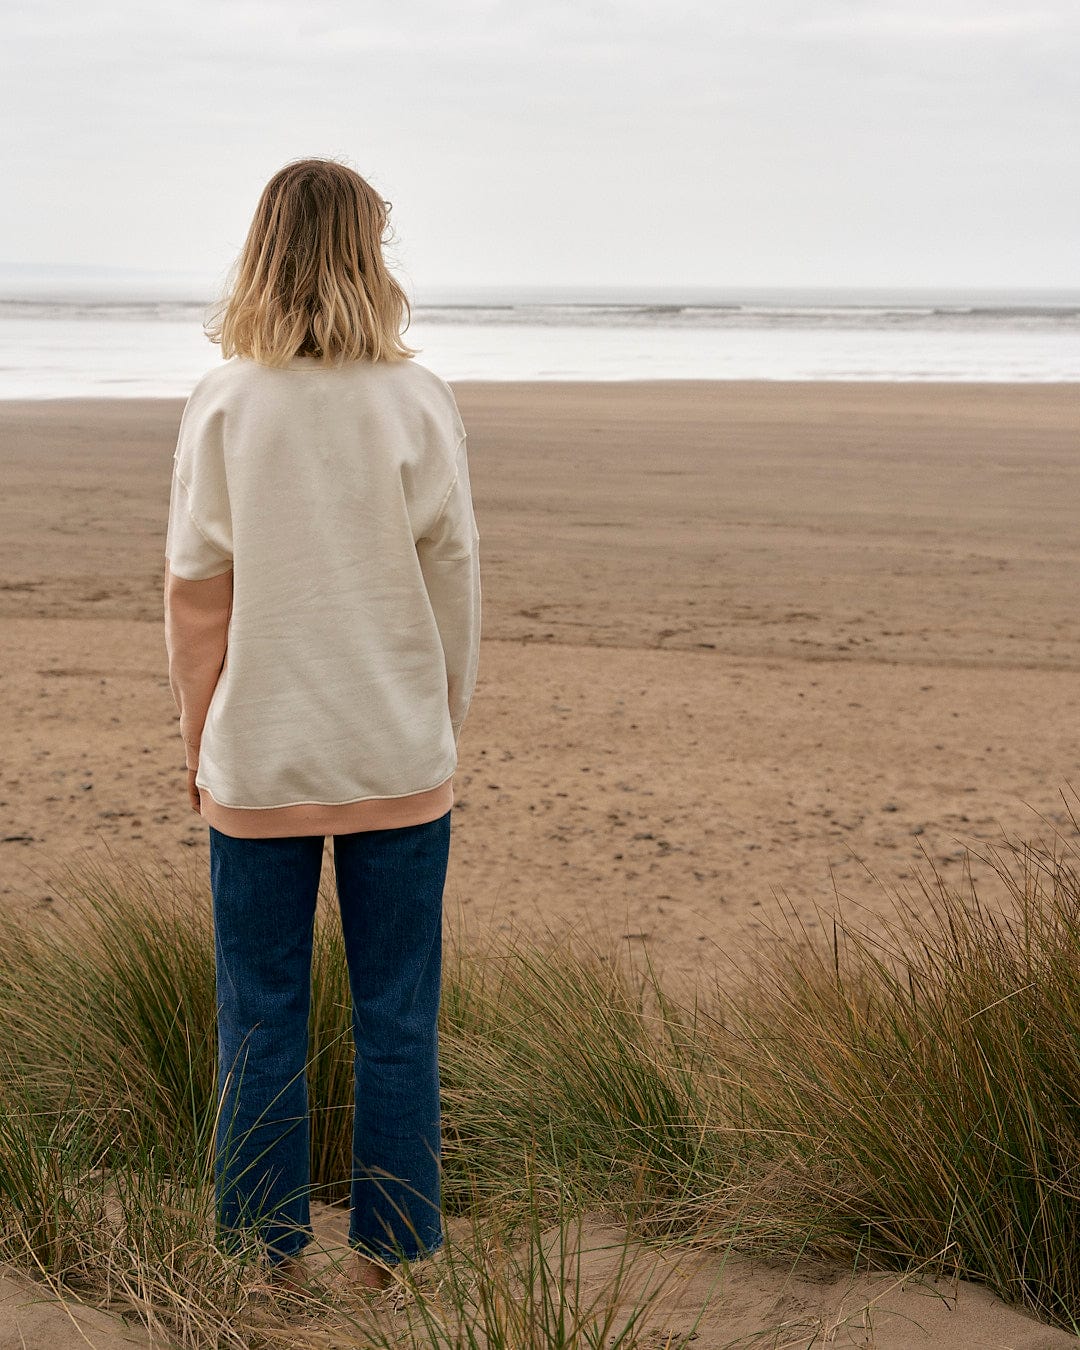 A woman standing on a beach looking at the ocean, wearing the Sofie - Womens Boyfriend Fit Sweat in Light Orange/Cream by Saltrock.